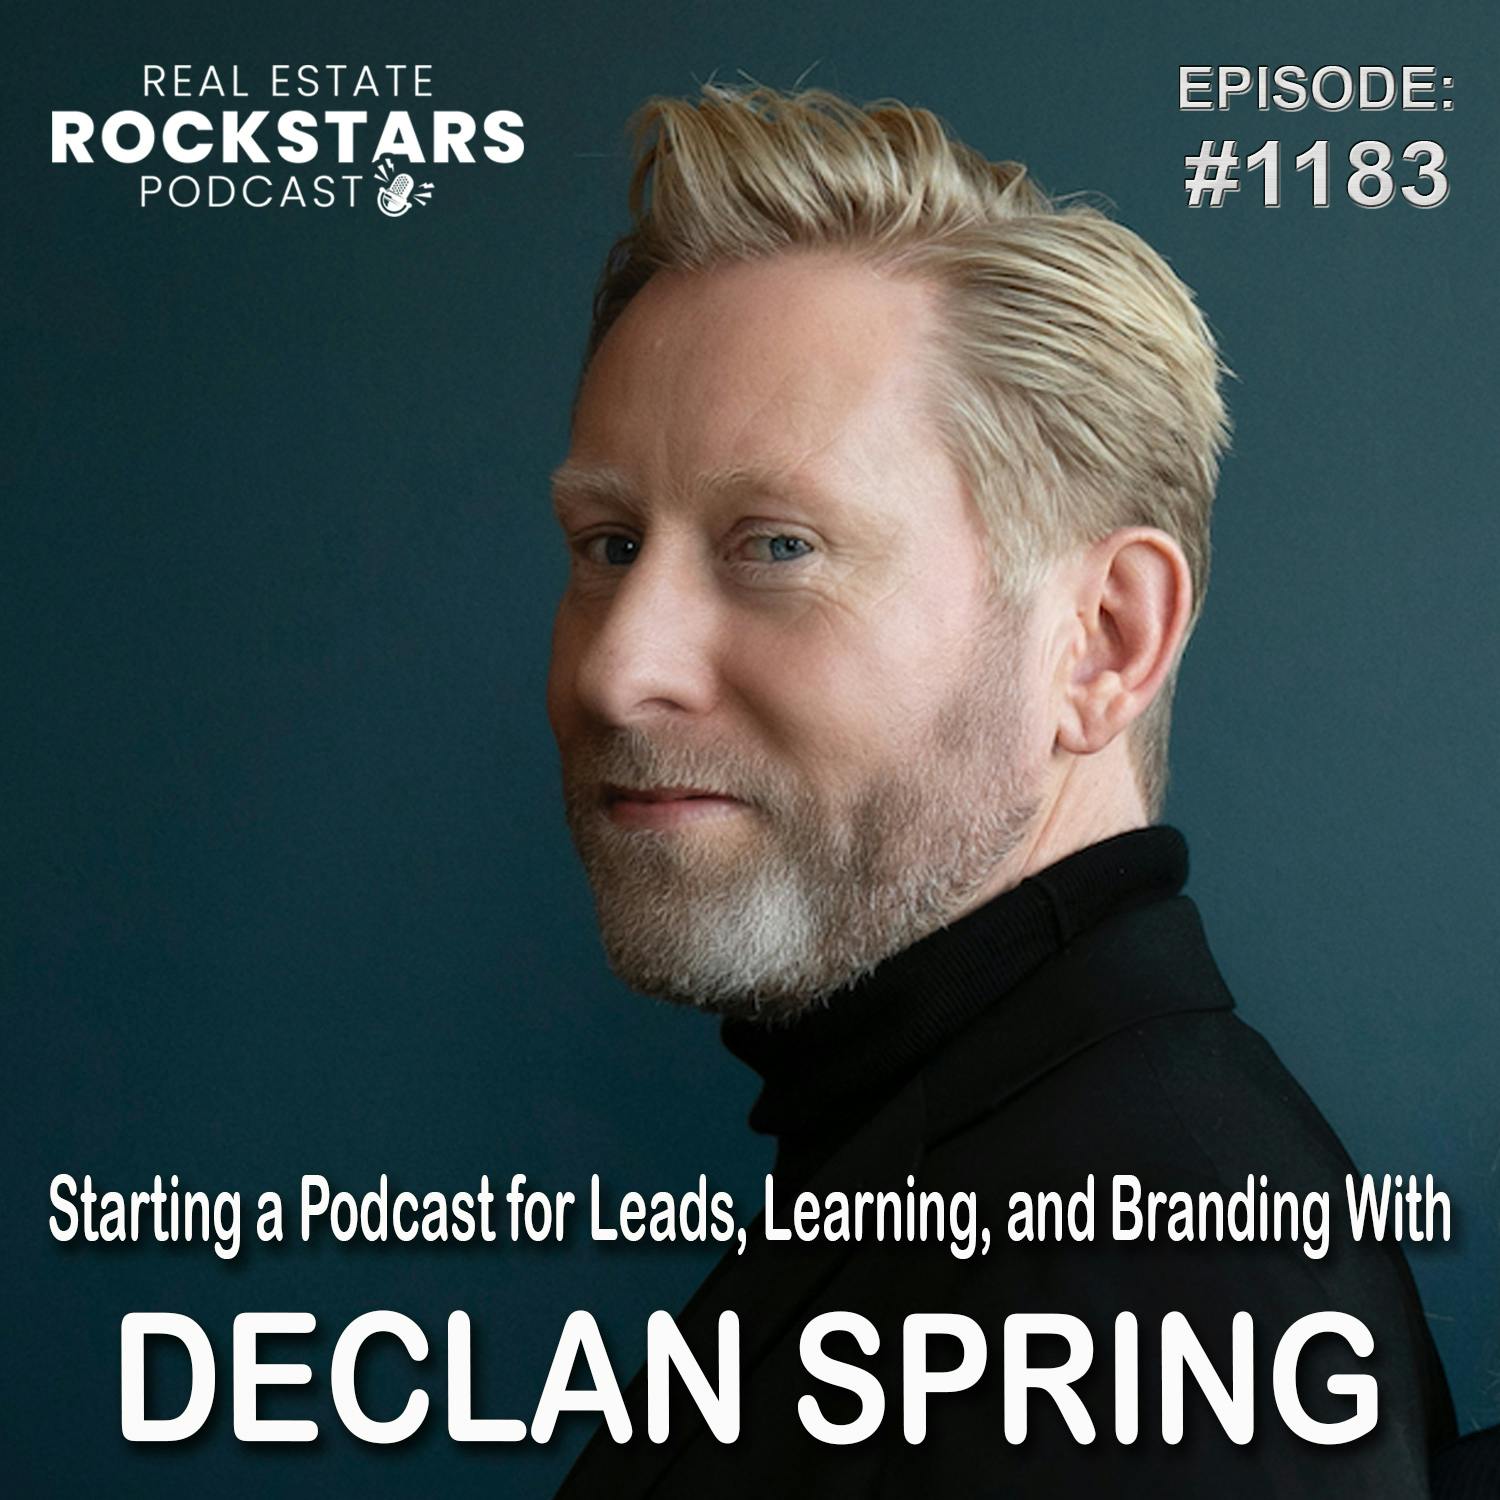 1183: Starting a Podcast for Leads, Learning, and Branding With Declan Spring